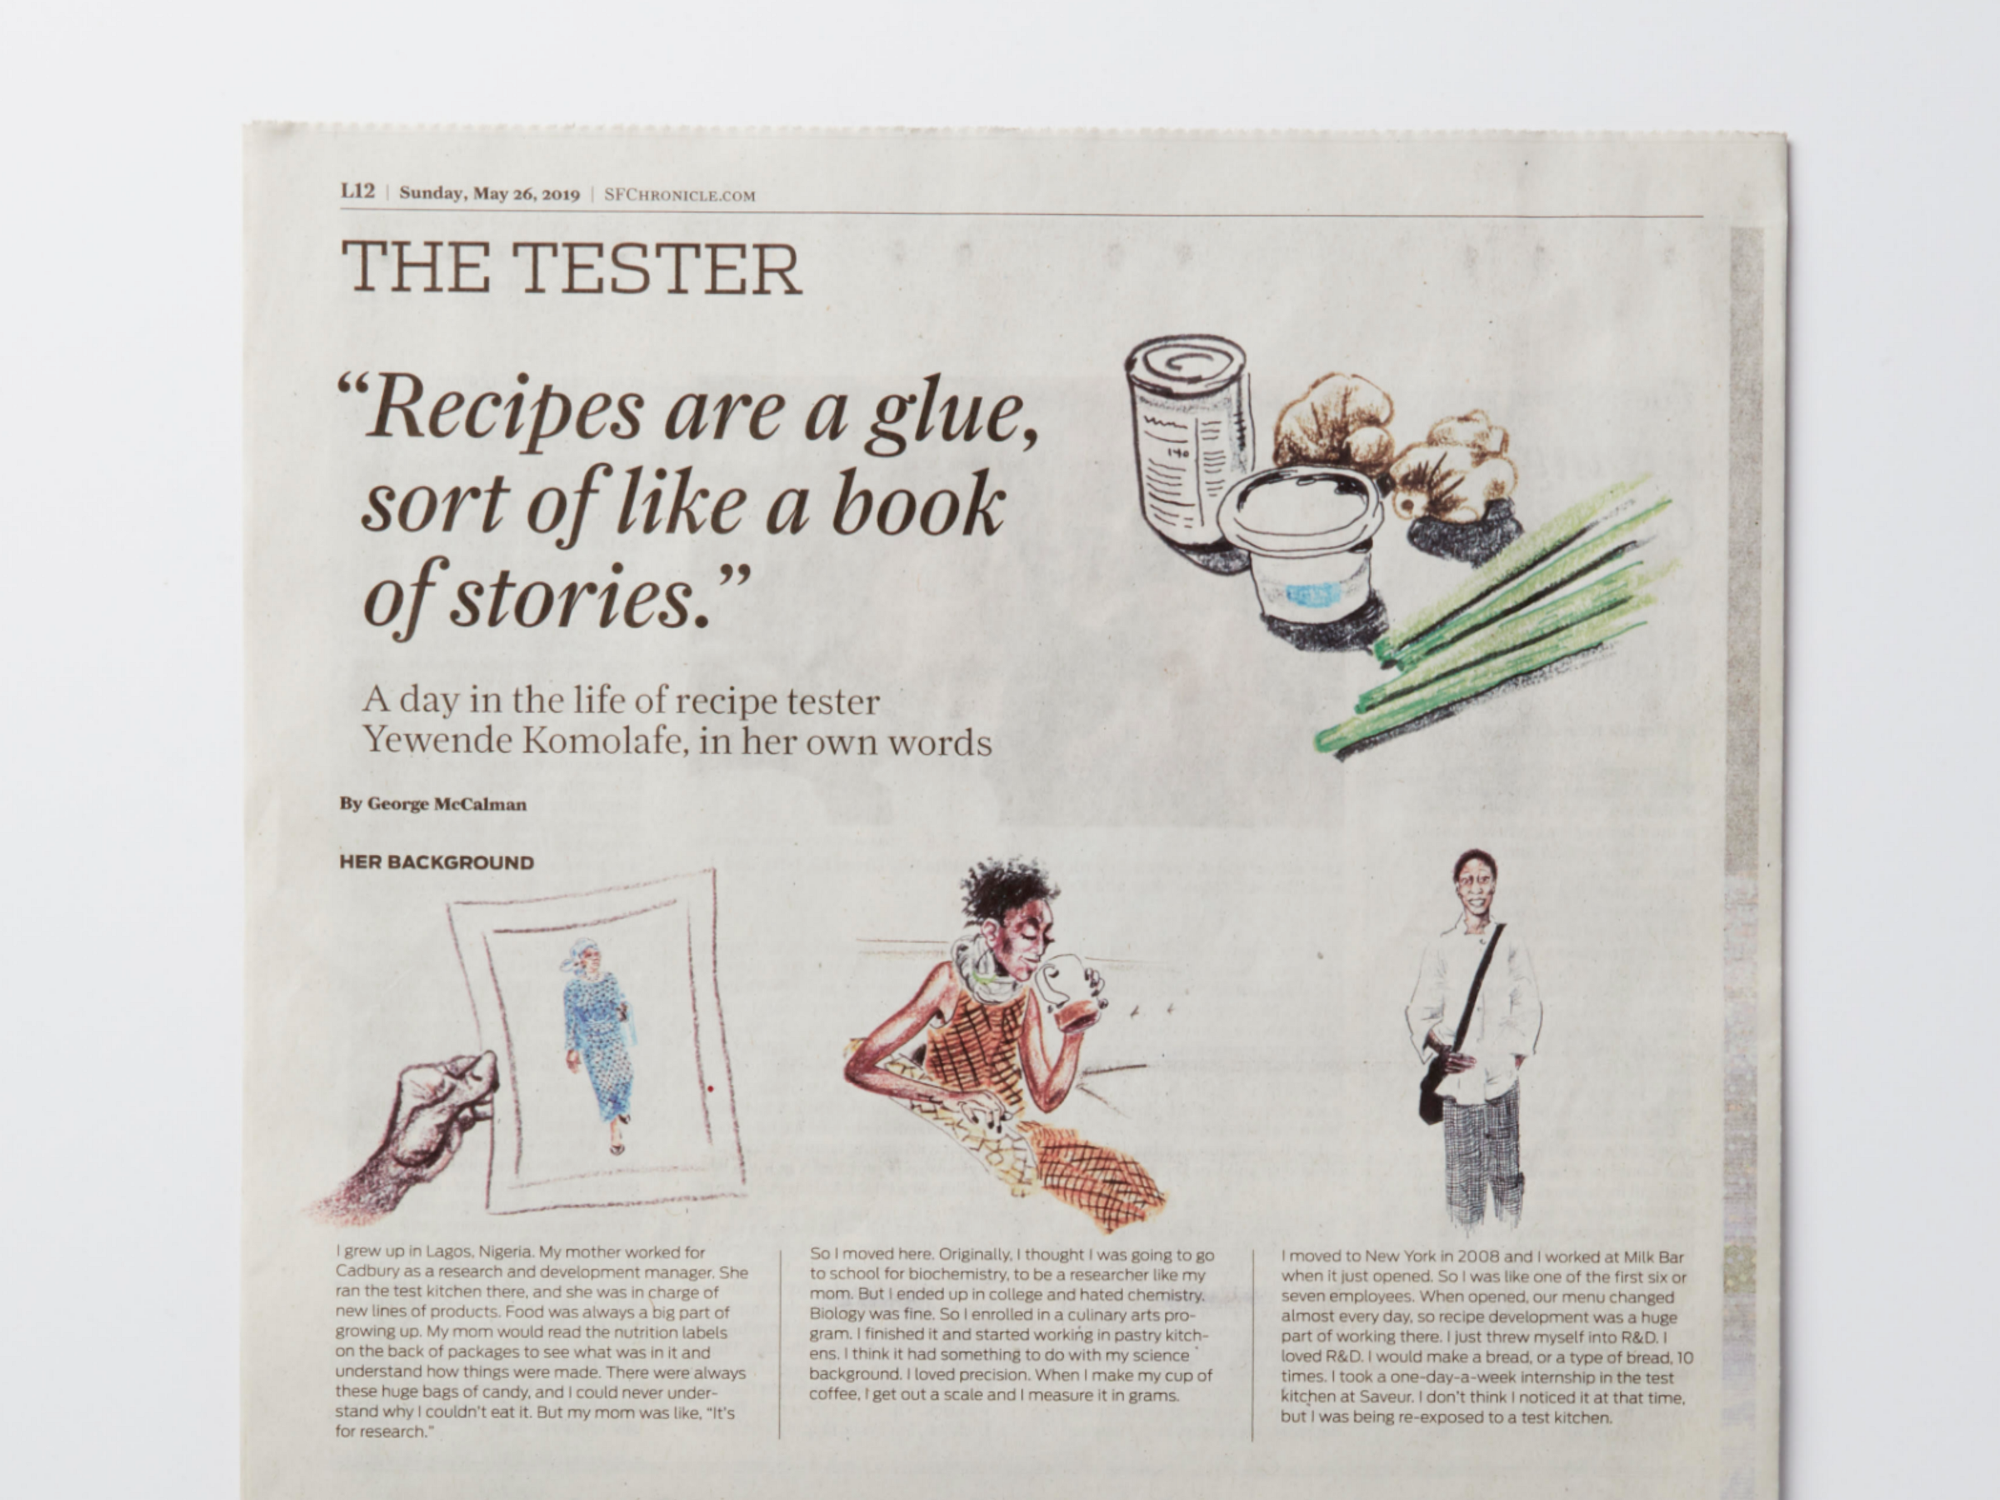 Illustrated newspaper interview with the title text “The tester, a day in the life of recipe tester Yewende Komolafe, in her own words.